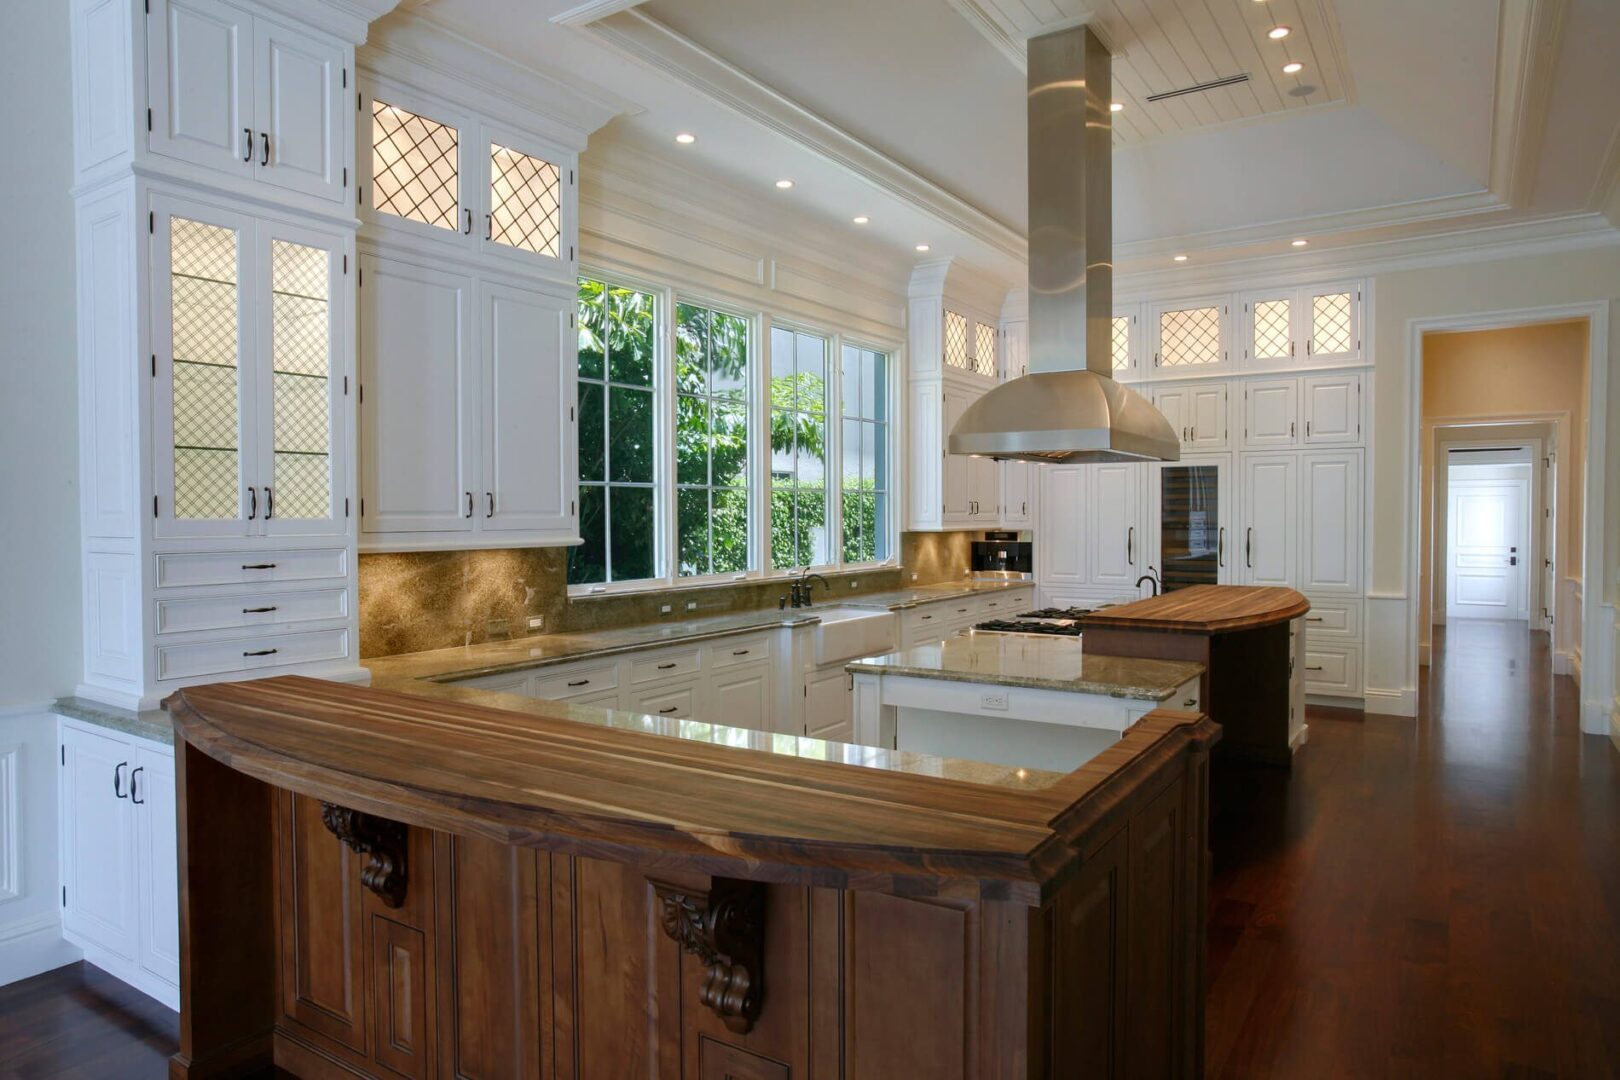 A kitchen with wooden cabinets and white walls.